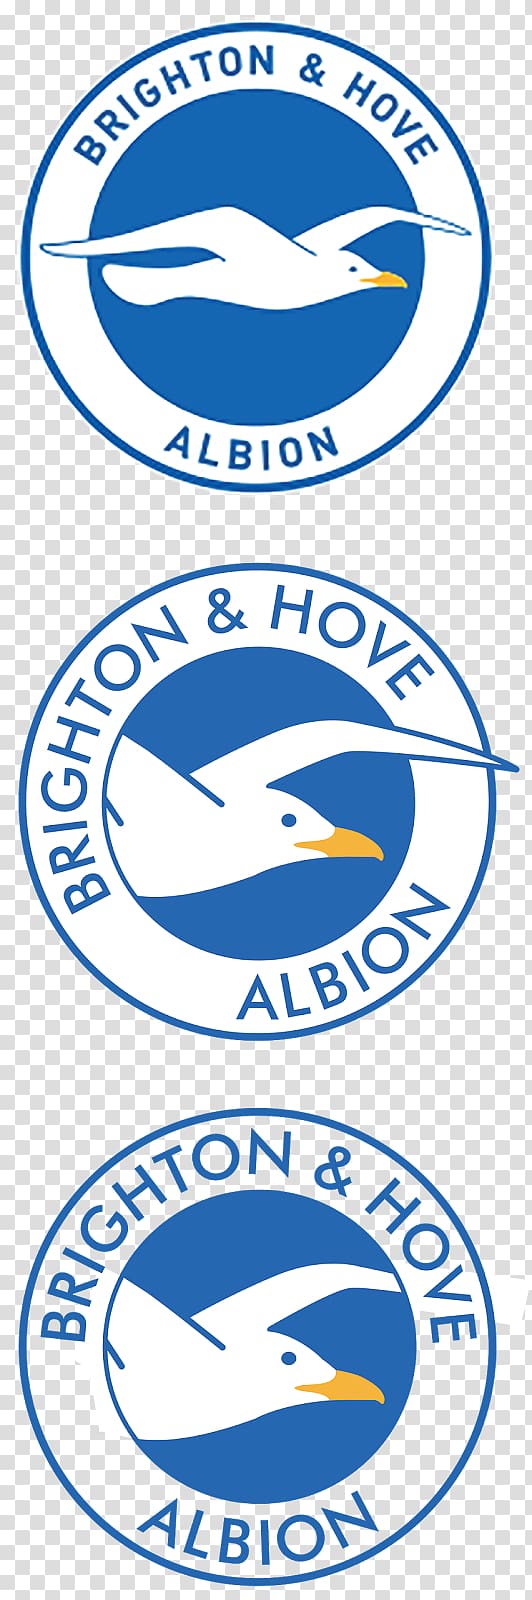 Brighton & Hove Albion F.C. Logo Trademark Brand, hole in the wall transparent background PNG clipart